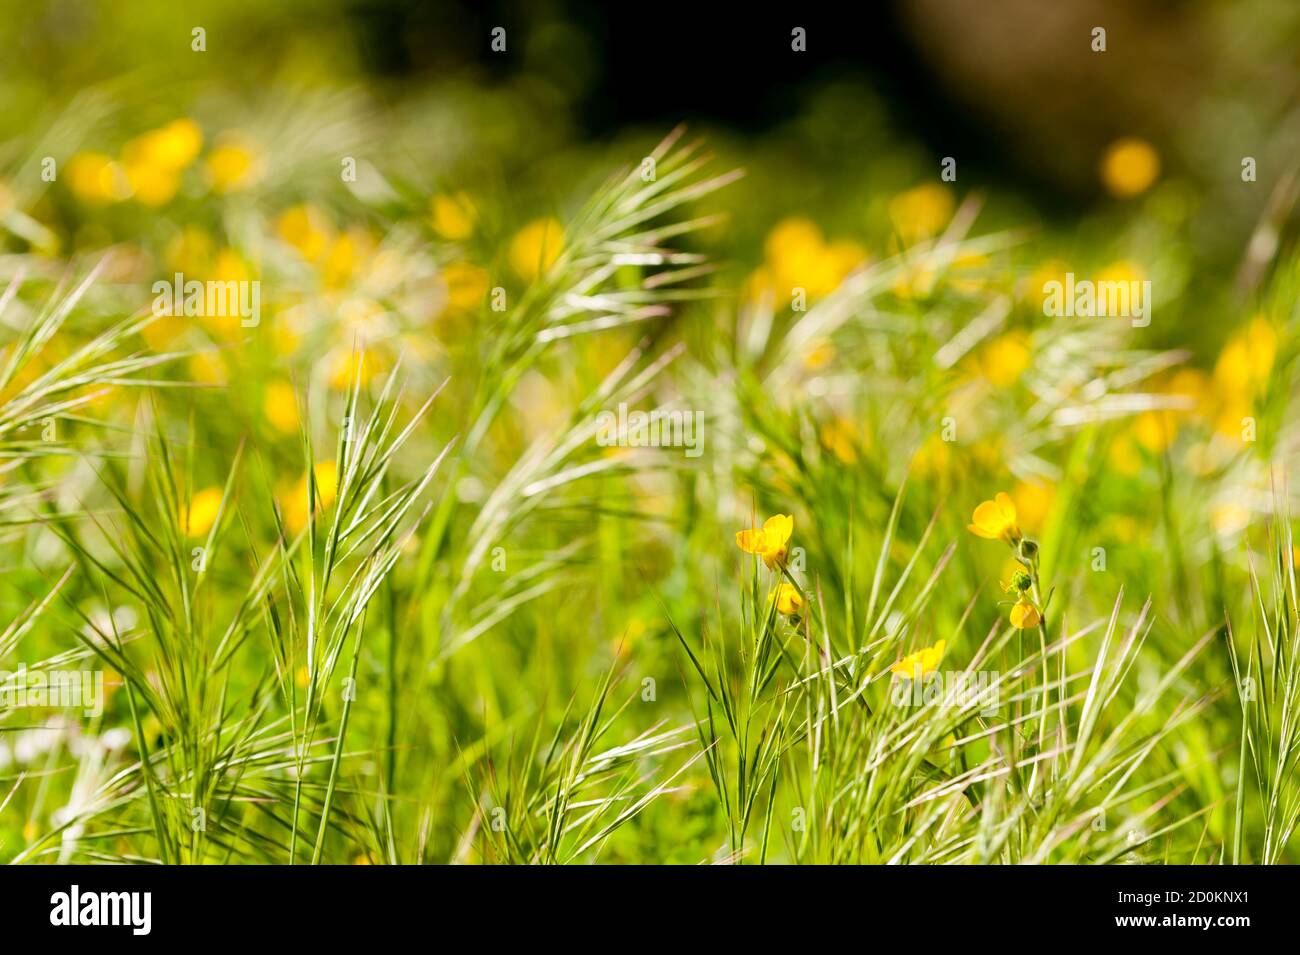 Spring bloom of yellow and white flowers in a green grass Stock Photo